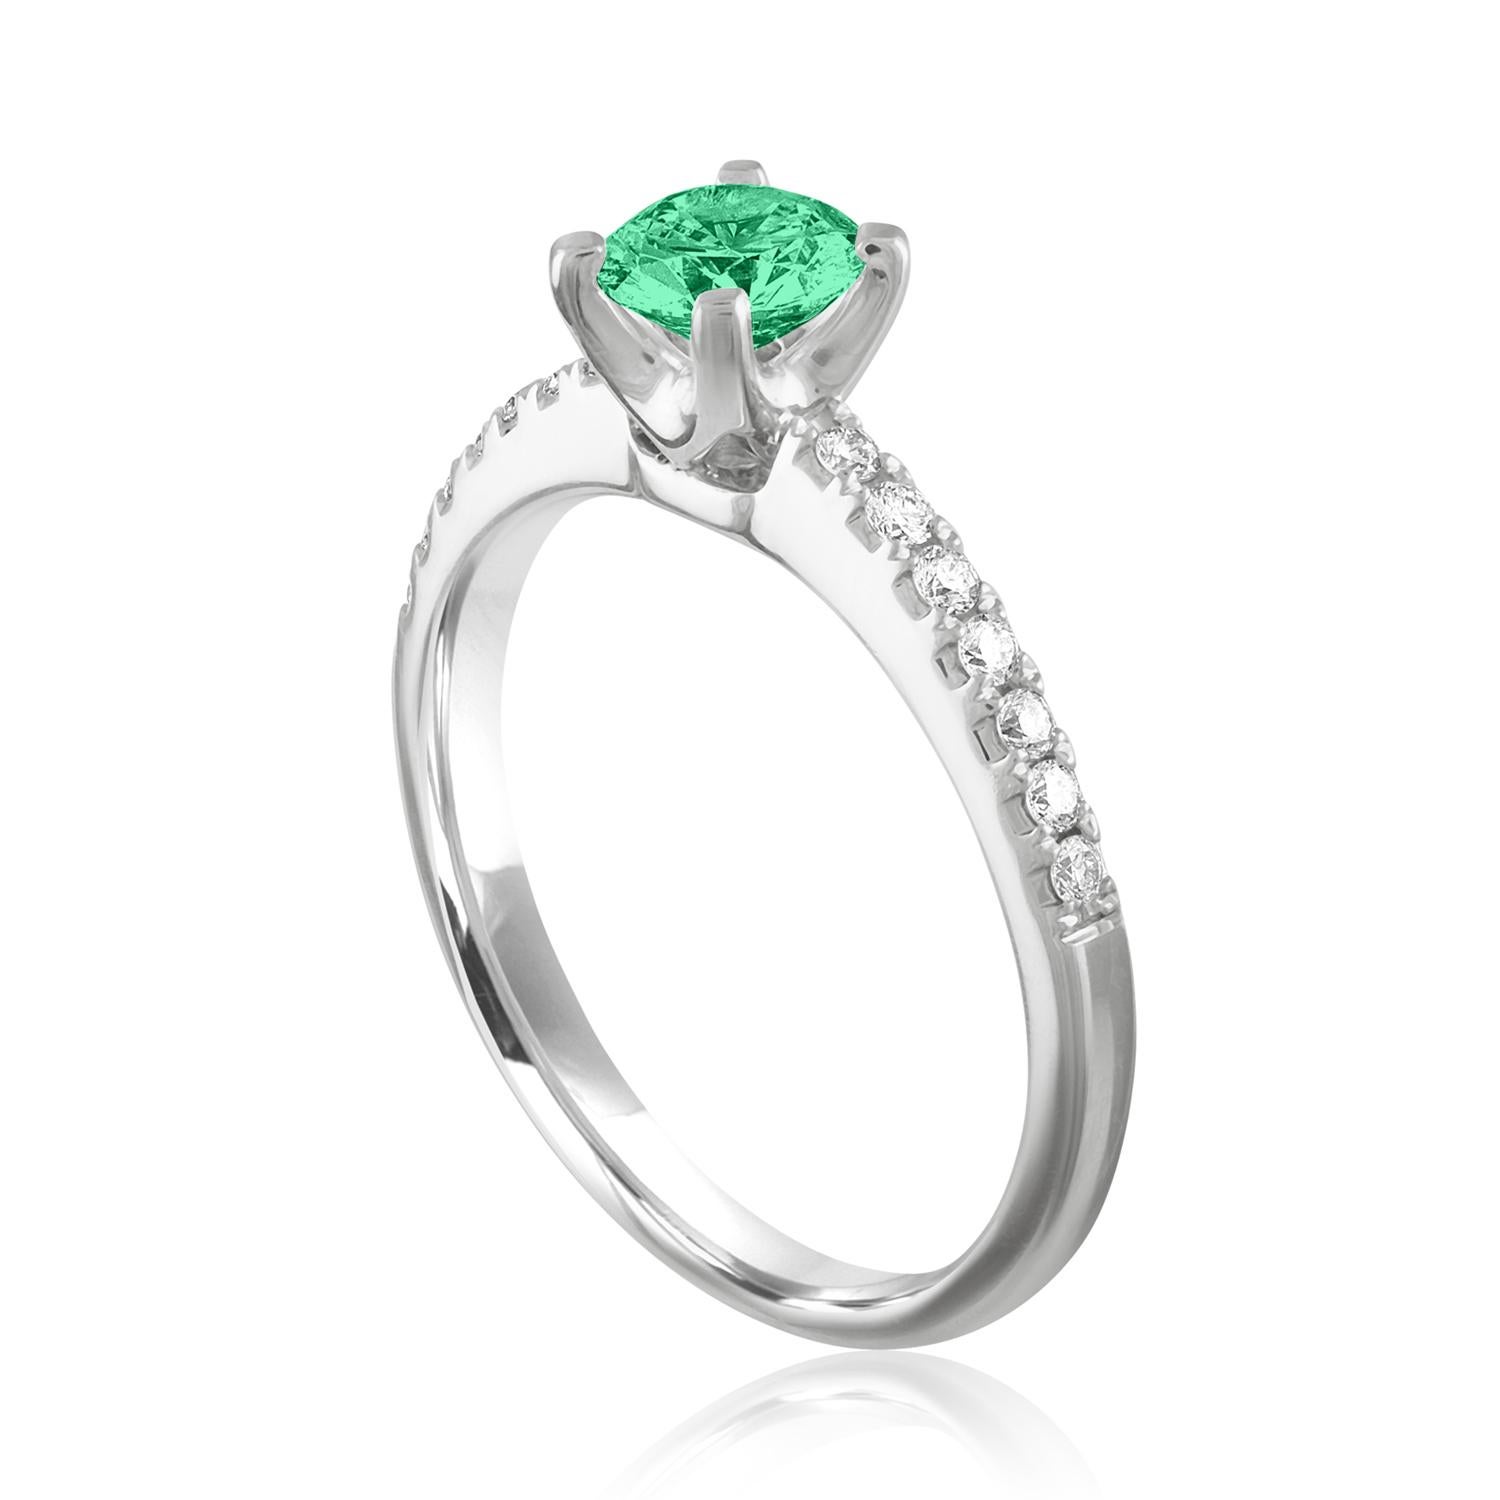 Beautiful Diamond & Emerald Ring
The ring is 18K White Gold.
There are 0.19 Carats in Diamonds F/G VS/SI
The Center is Round 0.46 Carat Emerald.
The Emerald is AGL certified.
The ring is a size 6.25, sizable.
The ring weighs 3.2 grams.